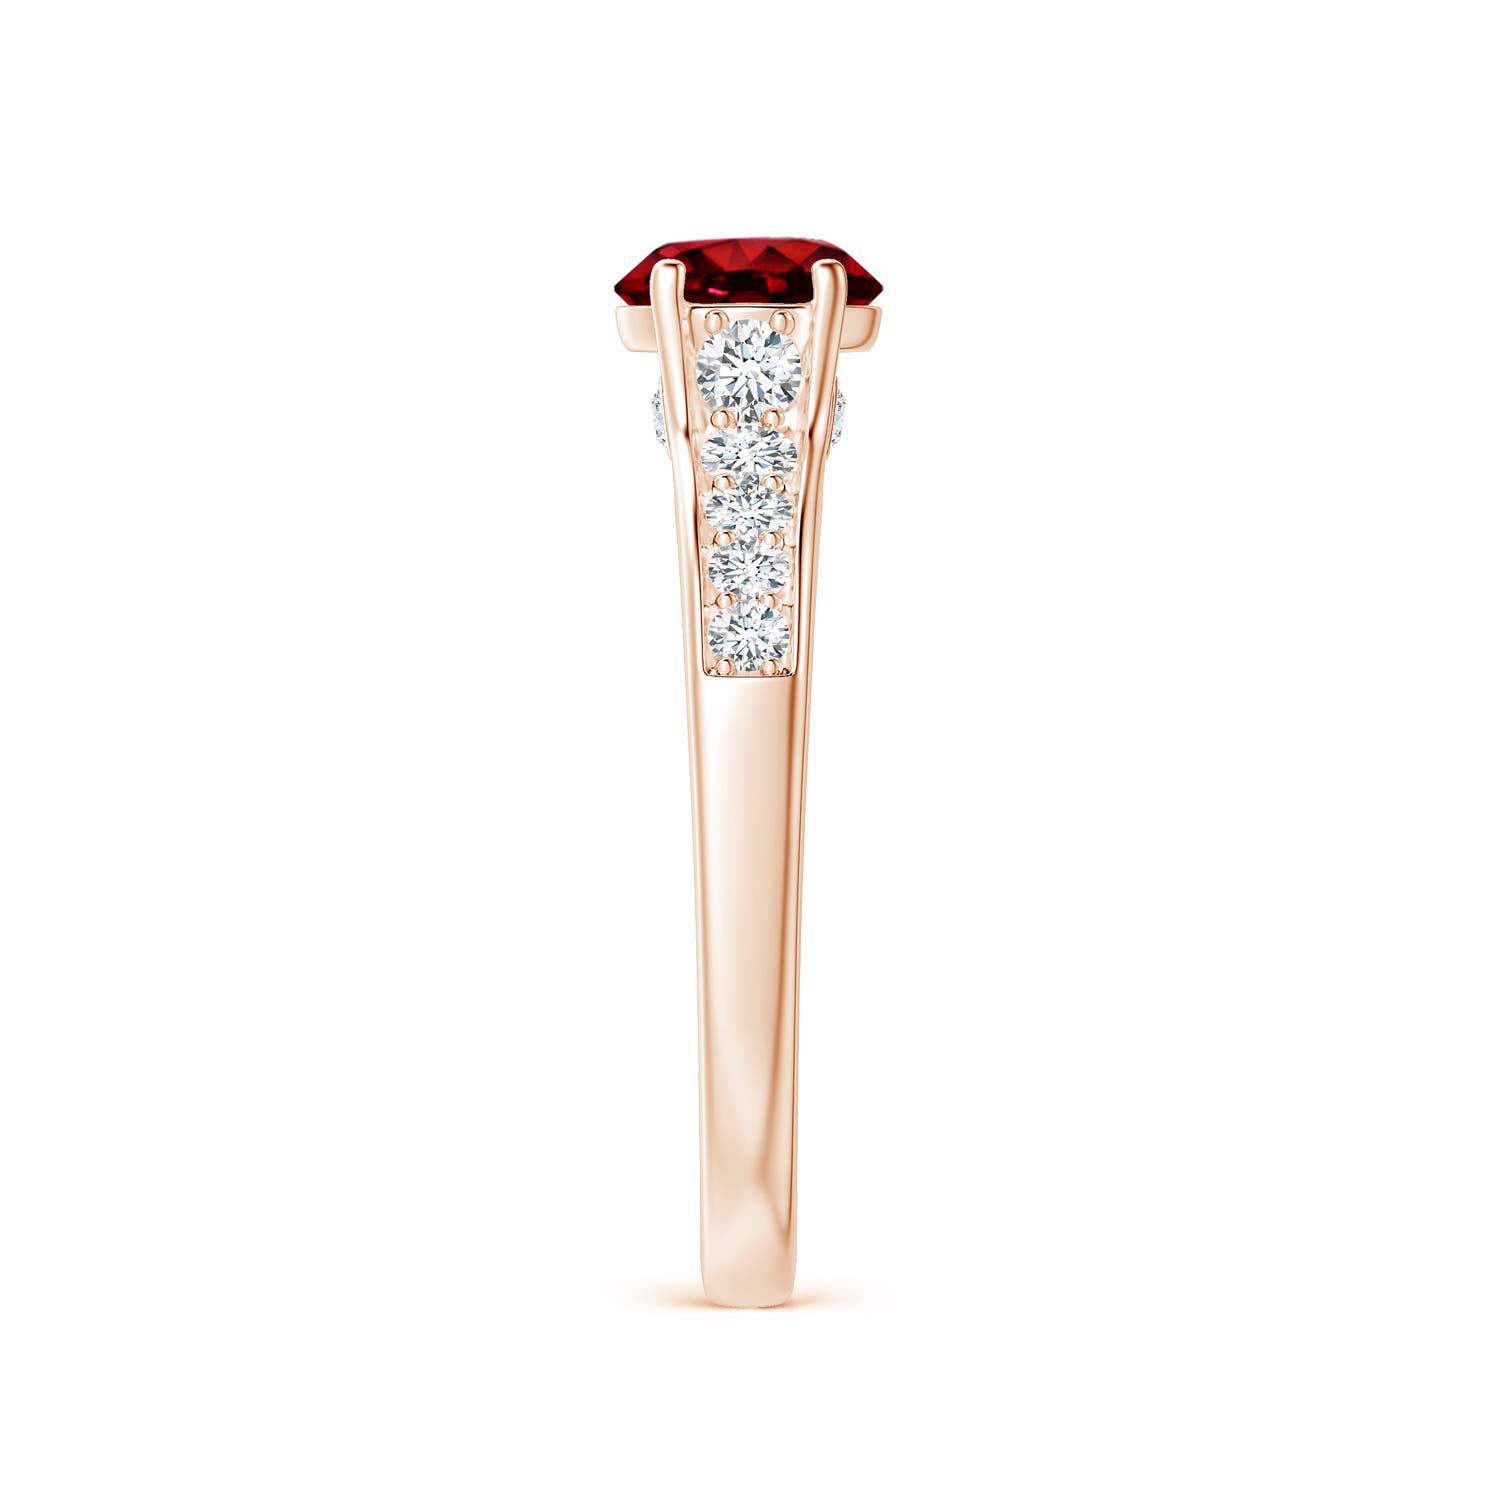 AAAA - Ruby / 1.38 CT / 14 KT Rose Gold